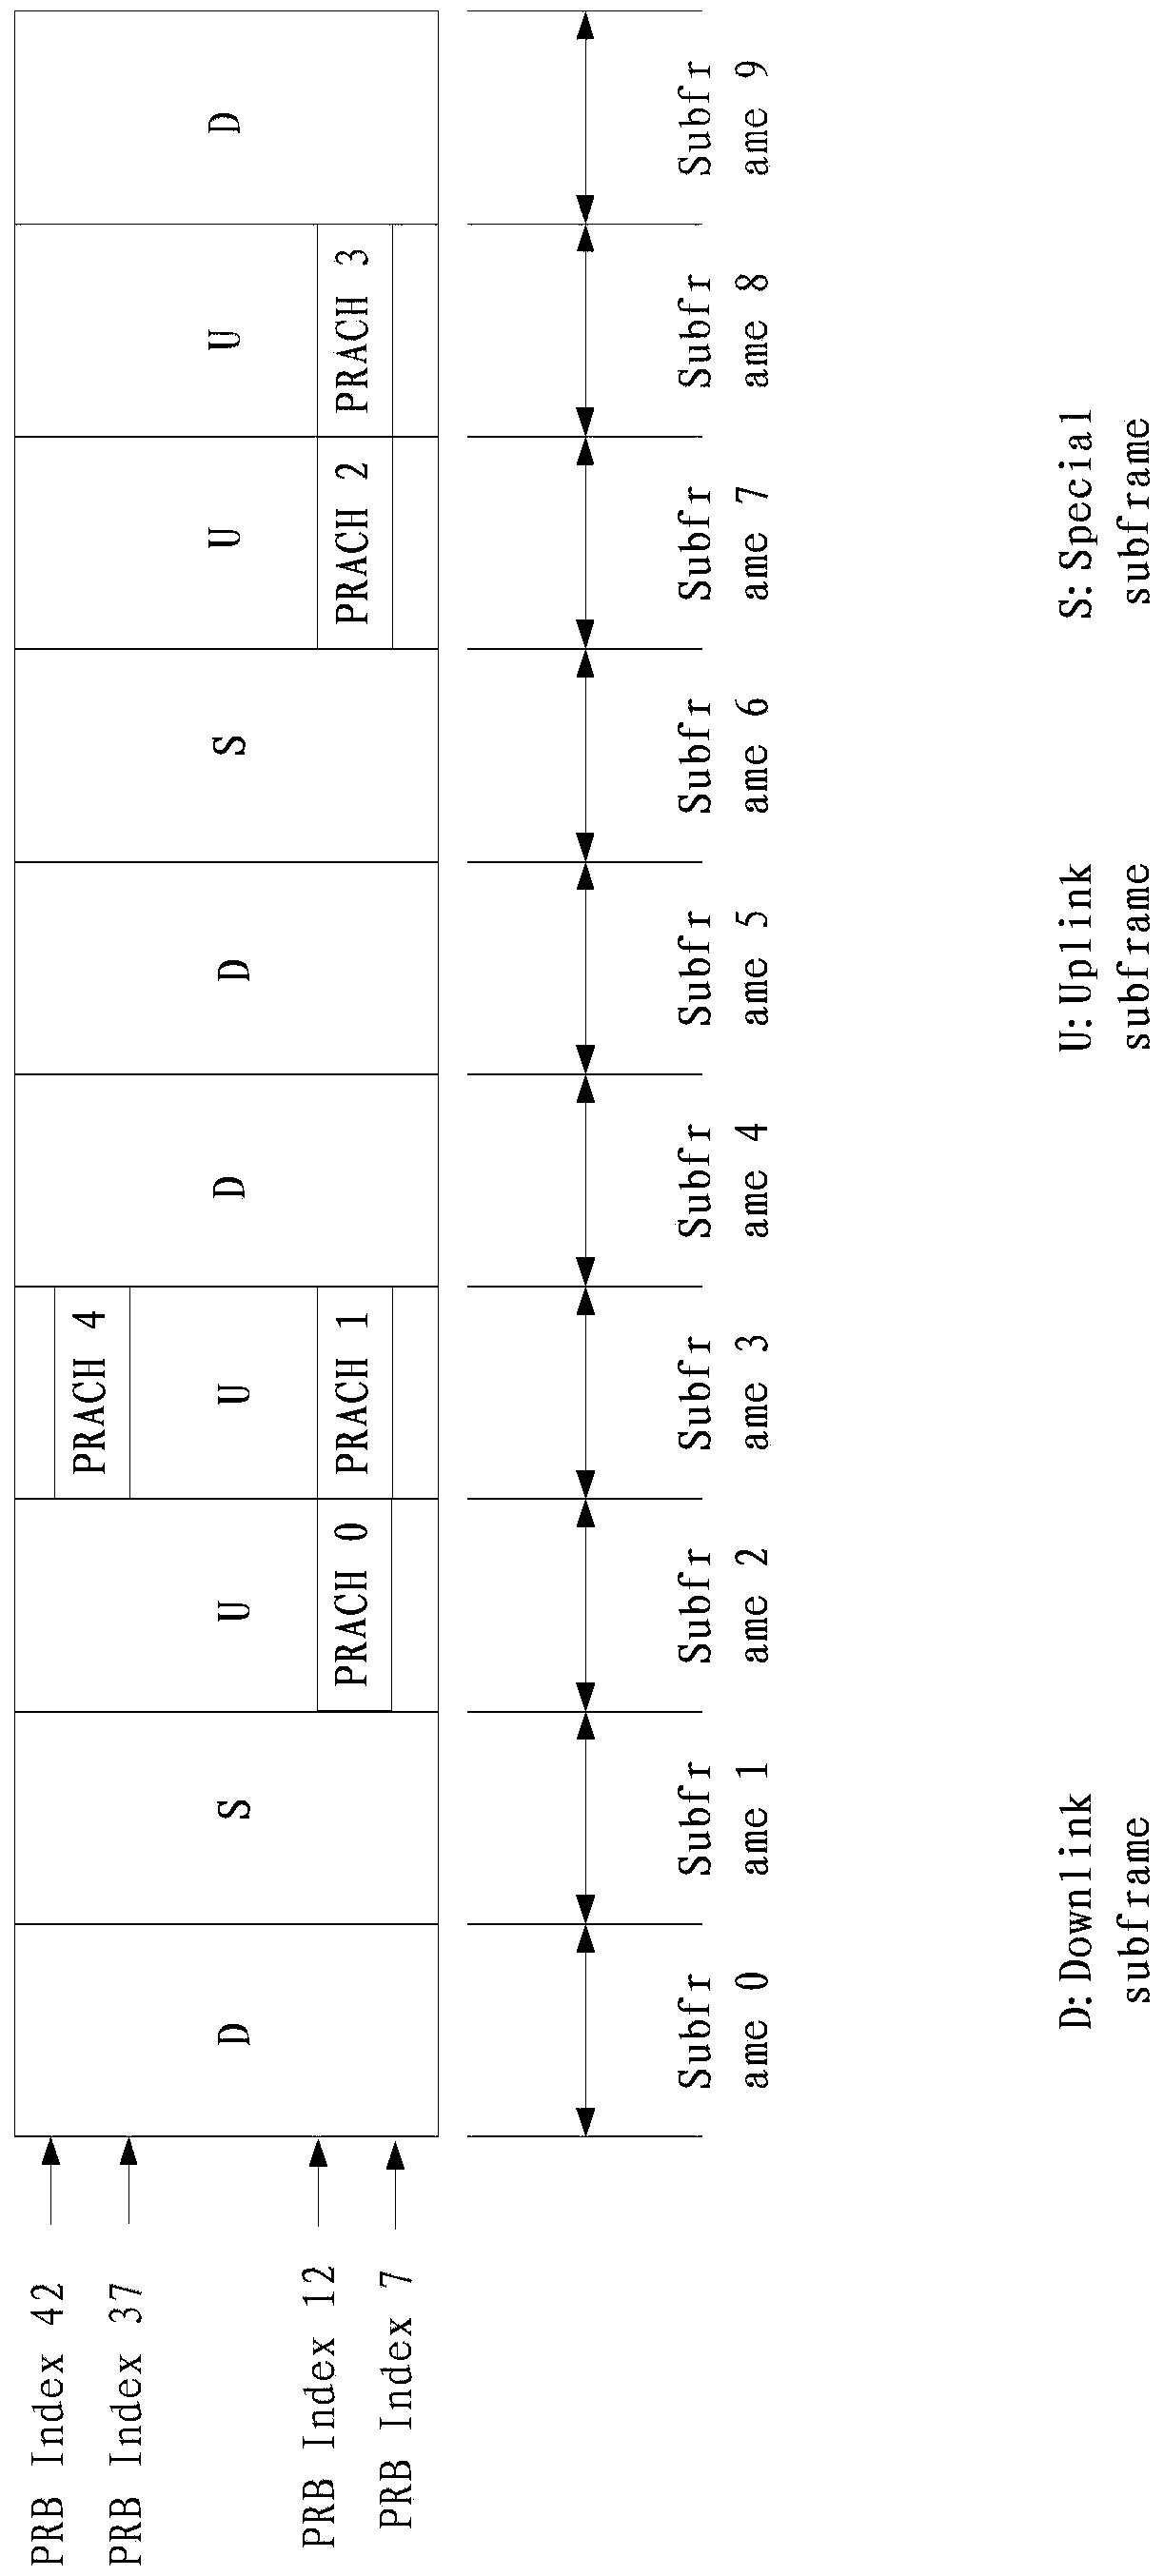 Random access sequence transmission method and device